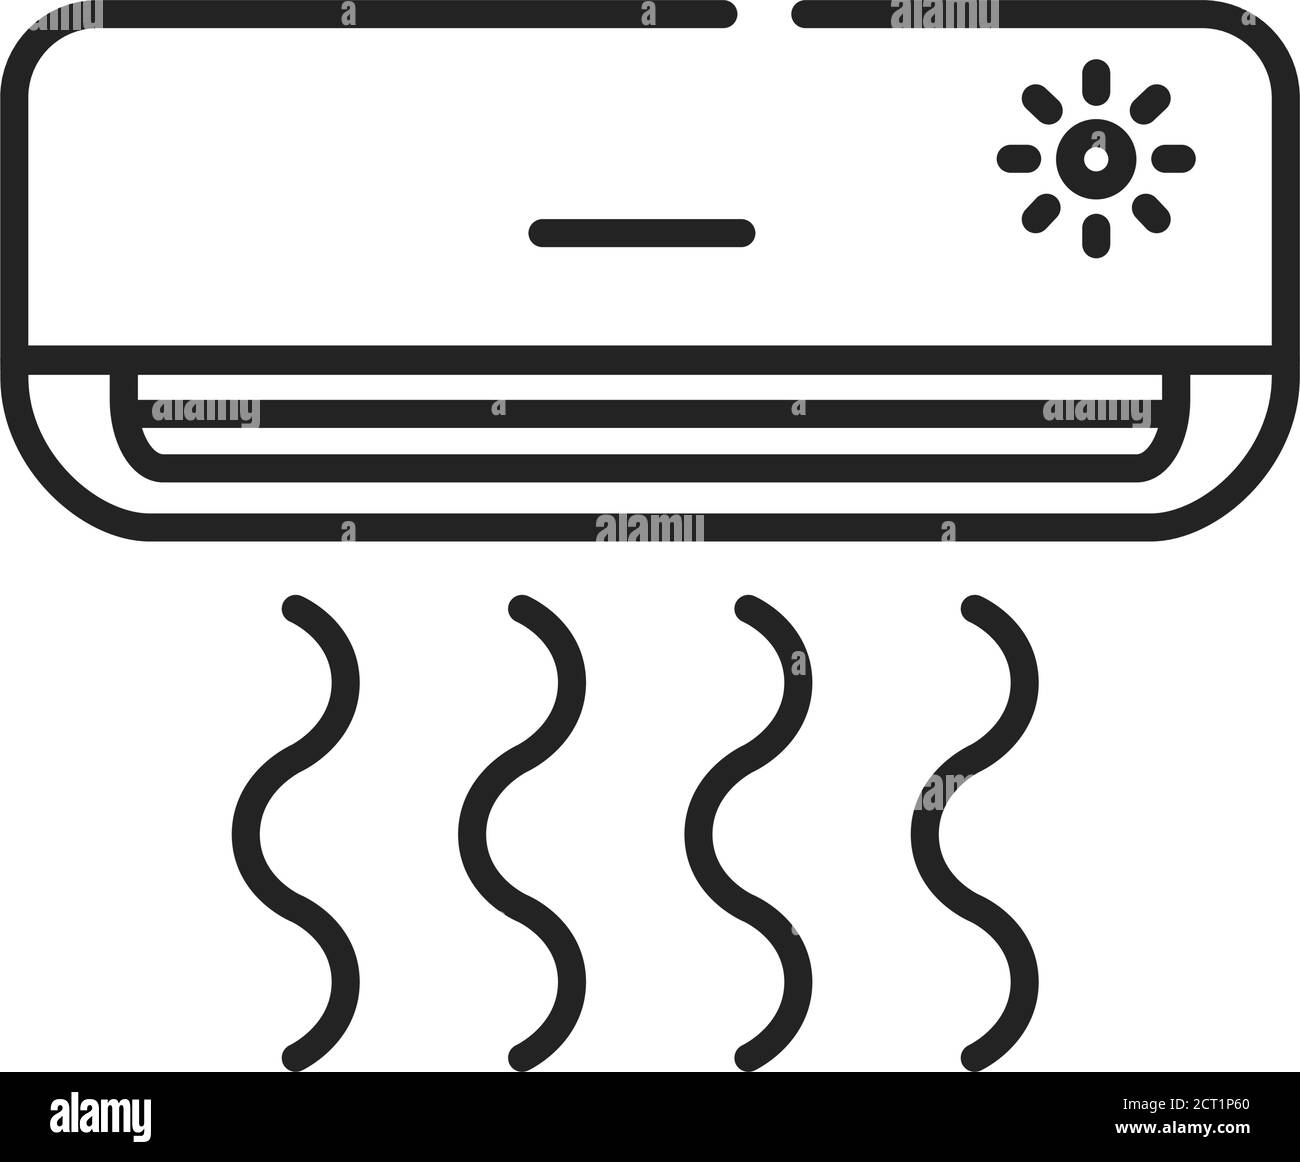 Air conditioner black line icon. System or a machine that treats air in a defined. Warm or cold air. Pictogram for web page, mobile app, promo. Stock Vector